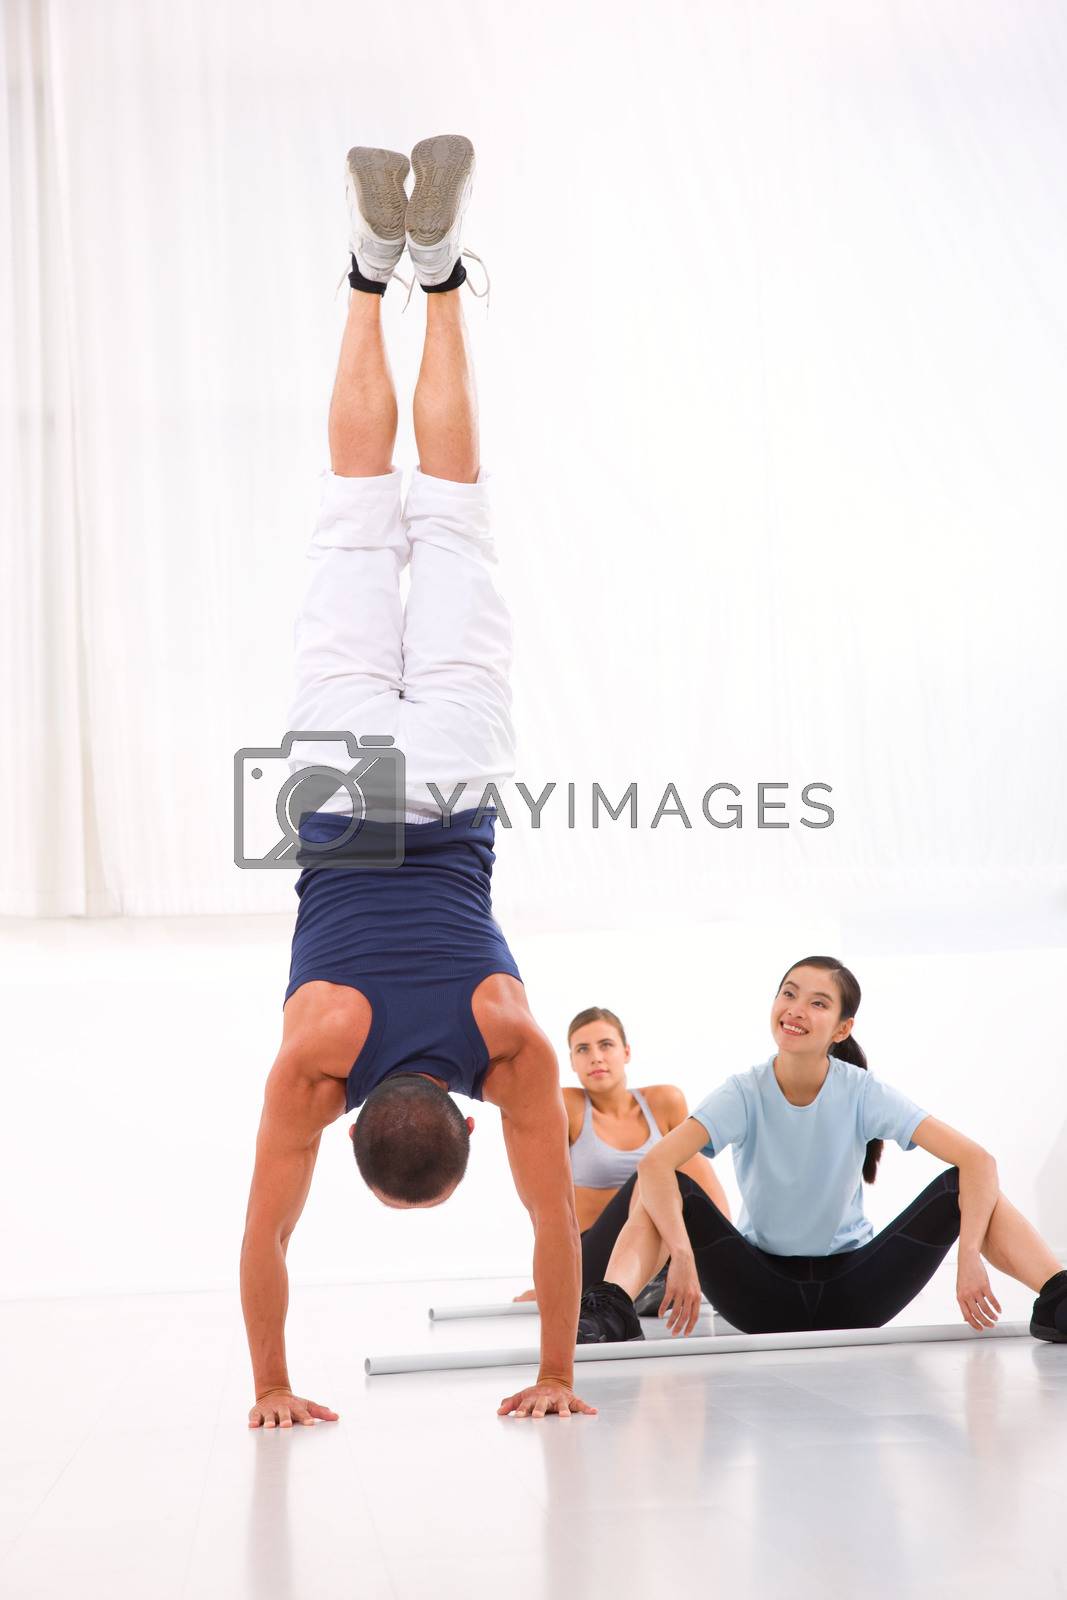 Royalty free image of Asian woman looking man doing handstand exercise by ambro